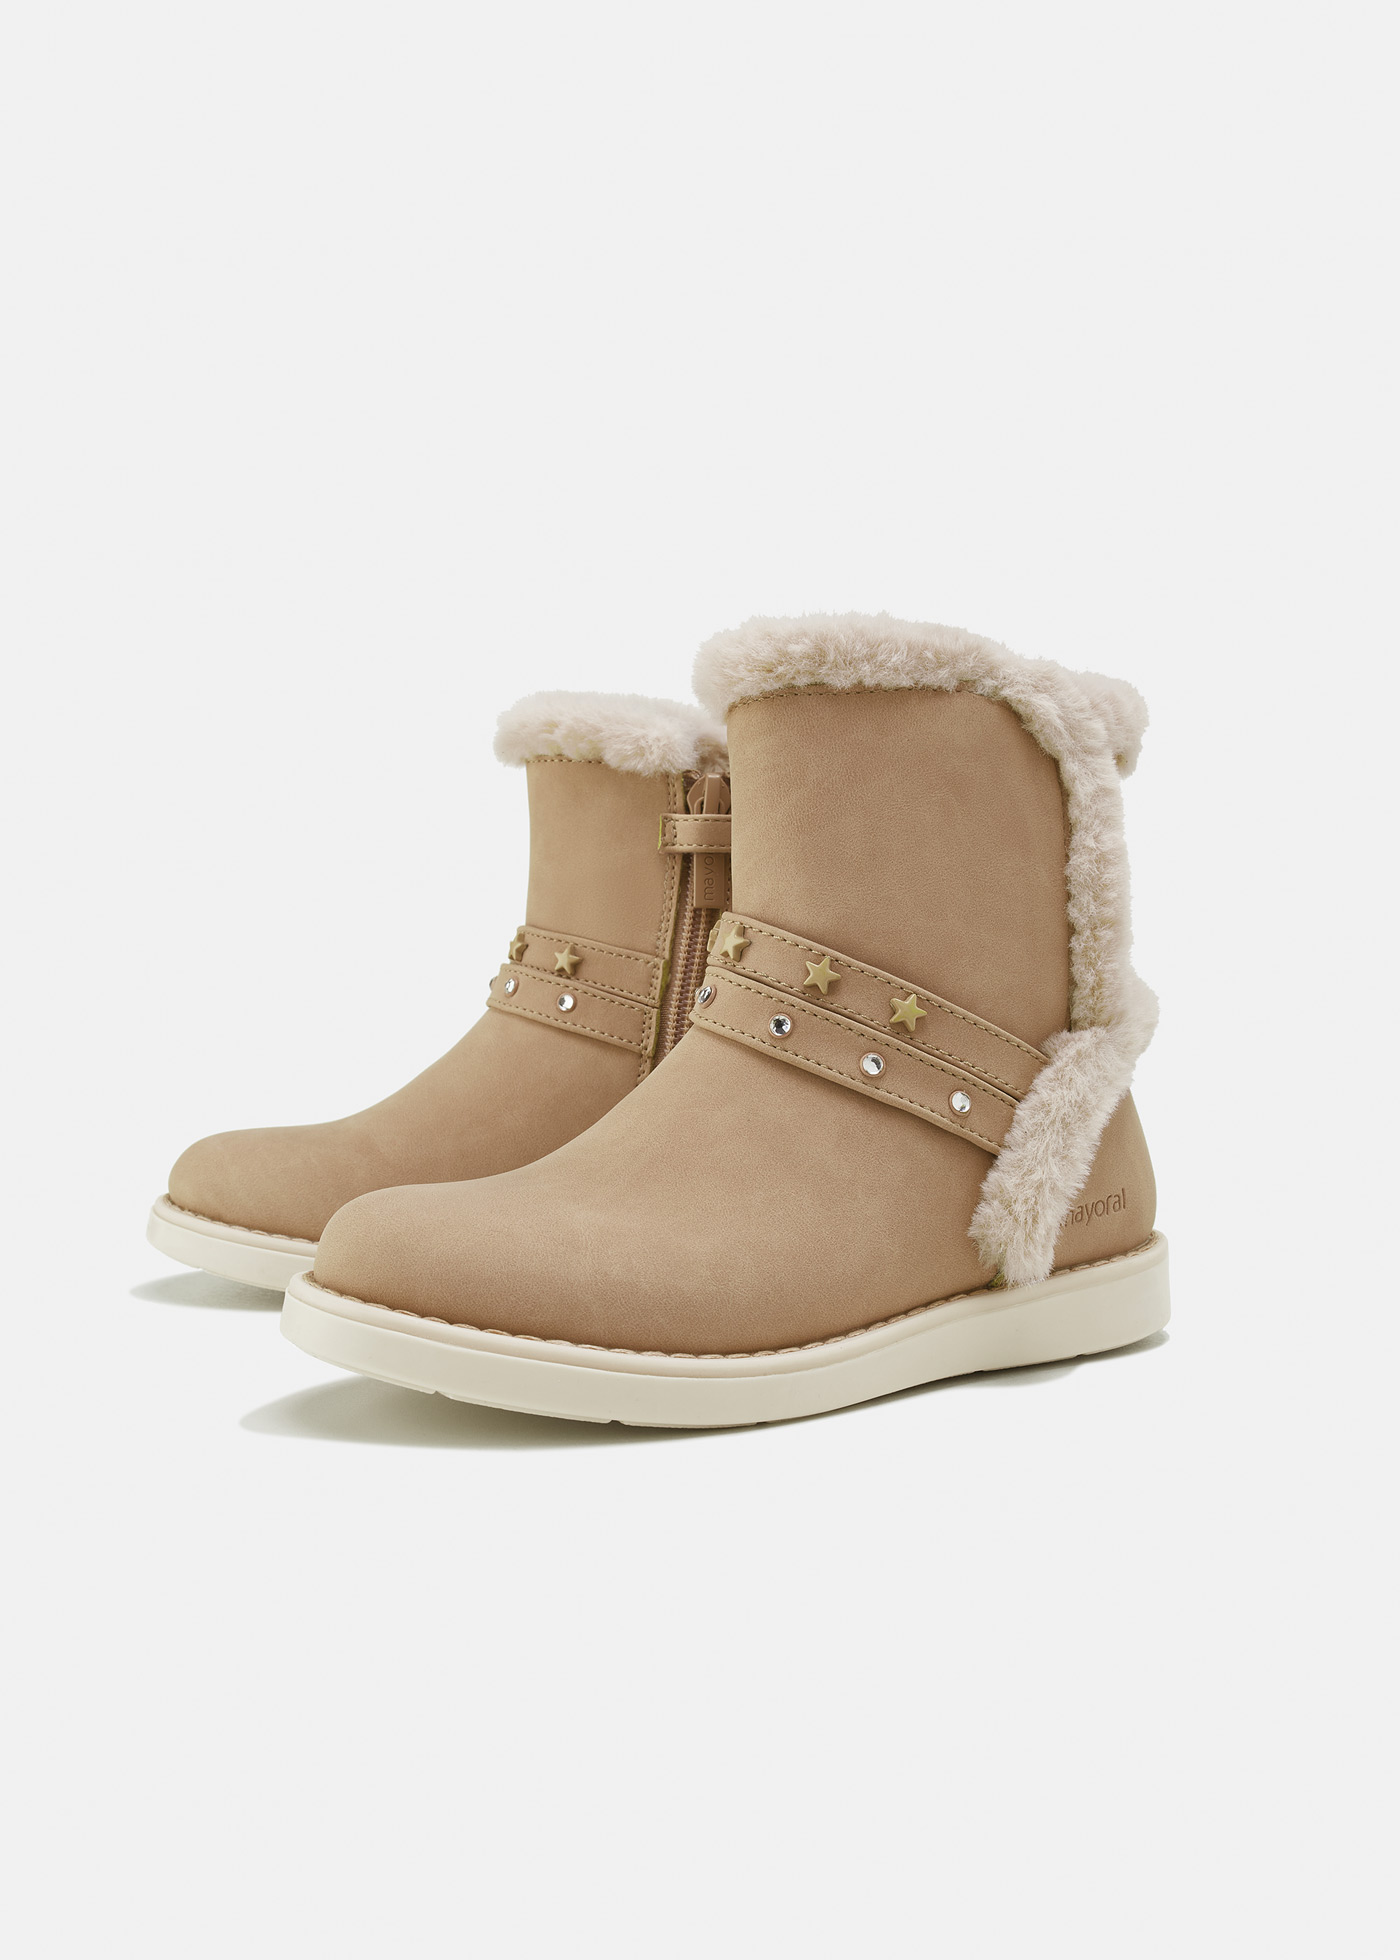 Faux fur lined boots girl | Mayoral